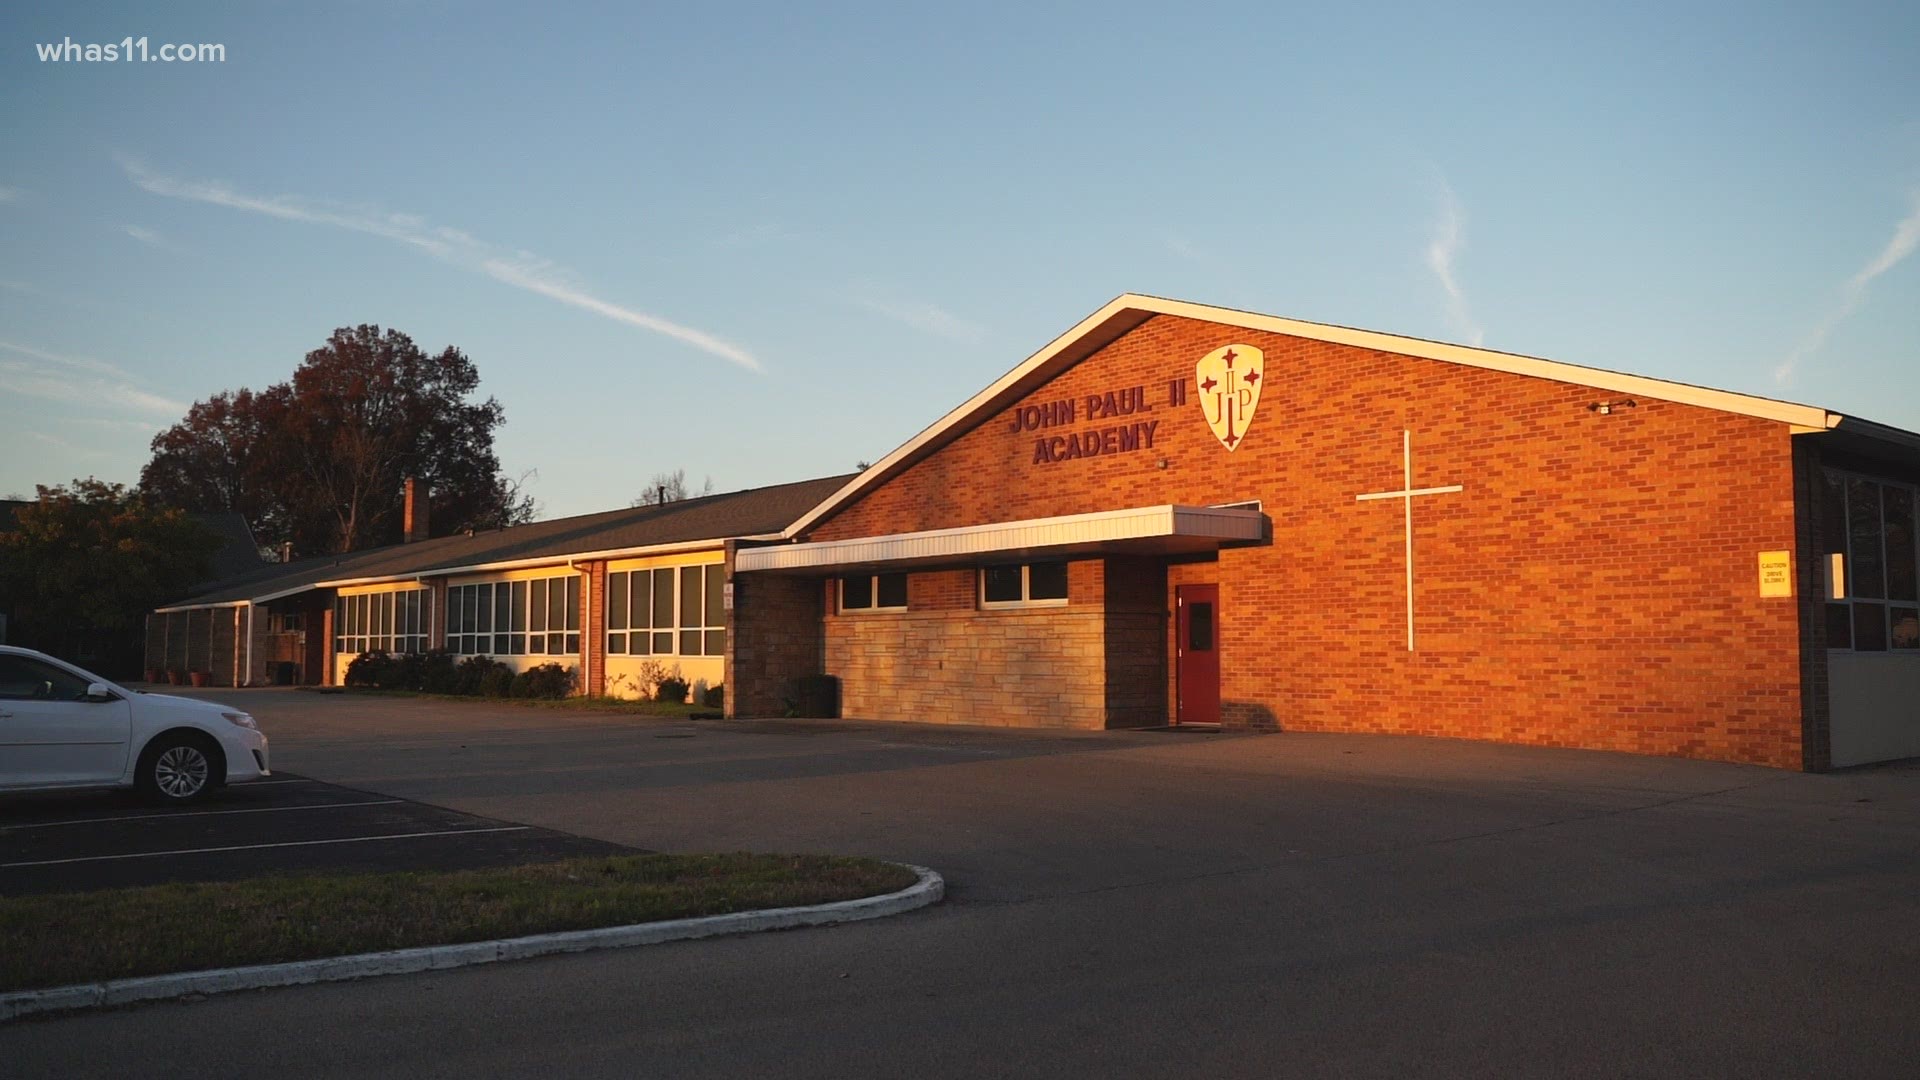 Louisville Catholic Schools recommended to have NTI through 2020